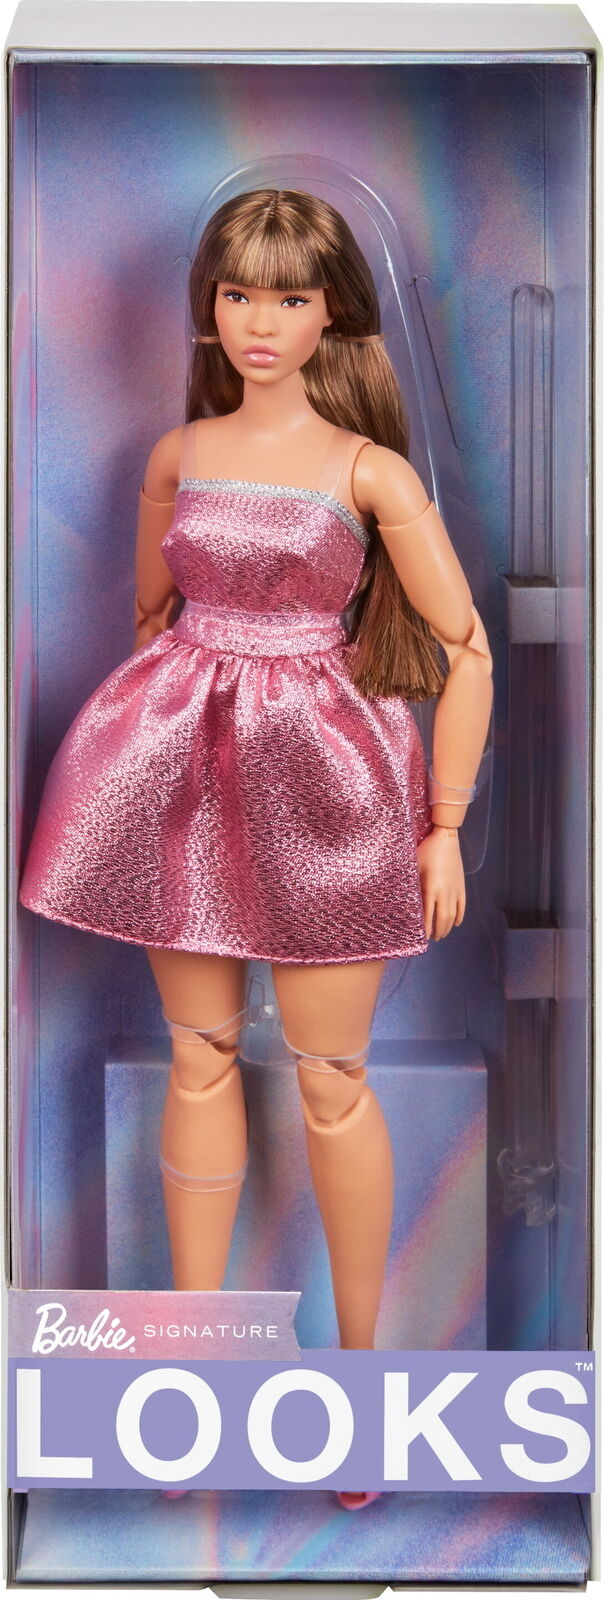 Barbie Looks No. 24 Collectible Doll with Brown Hair and Modern Y2K Fashion